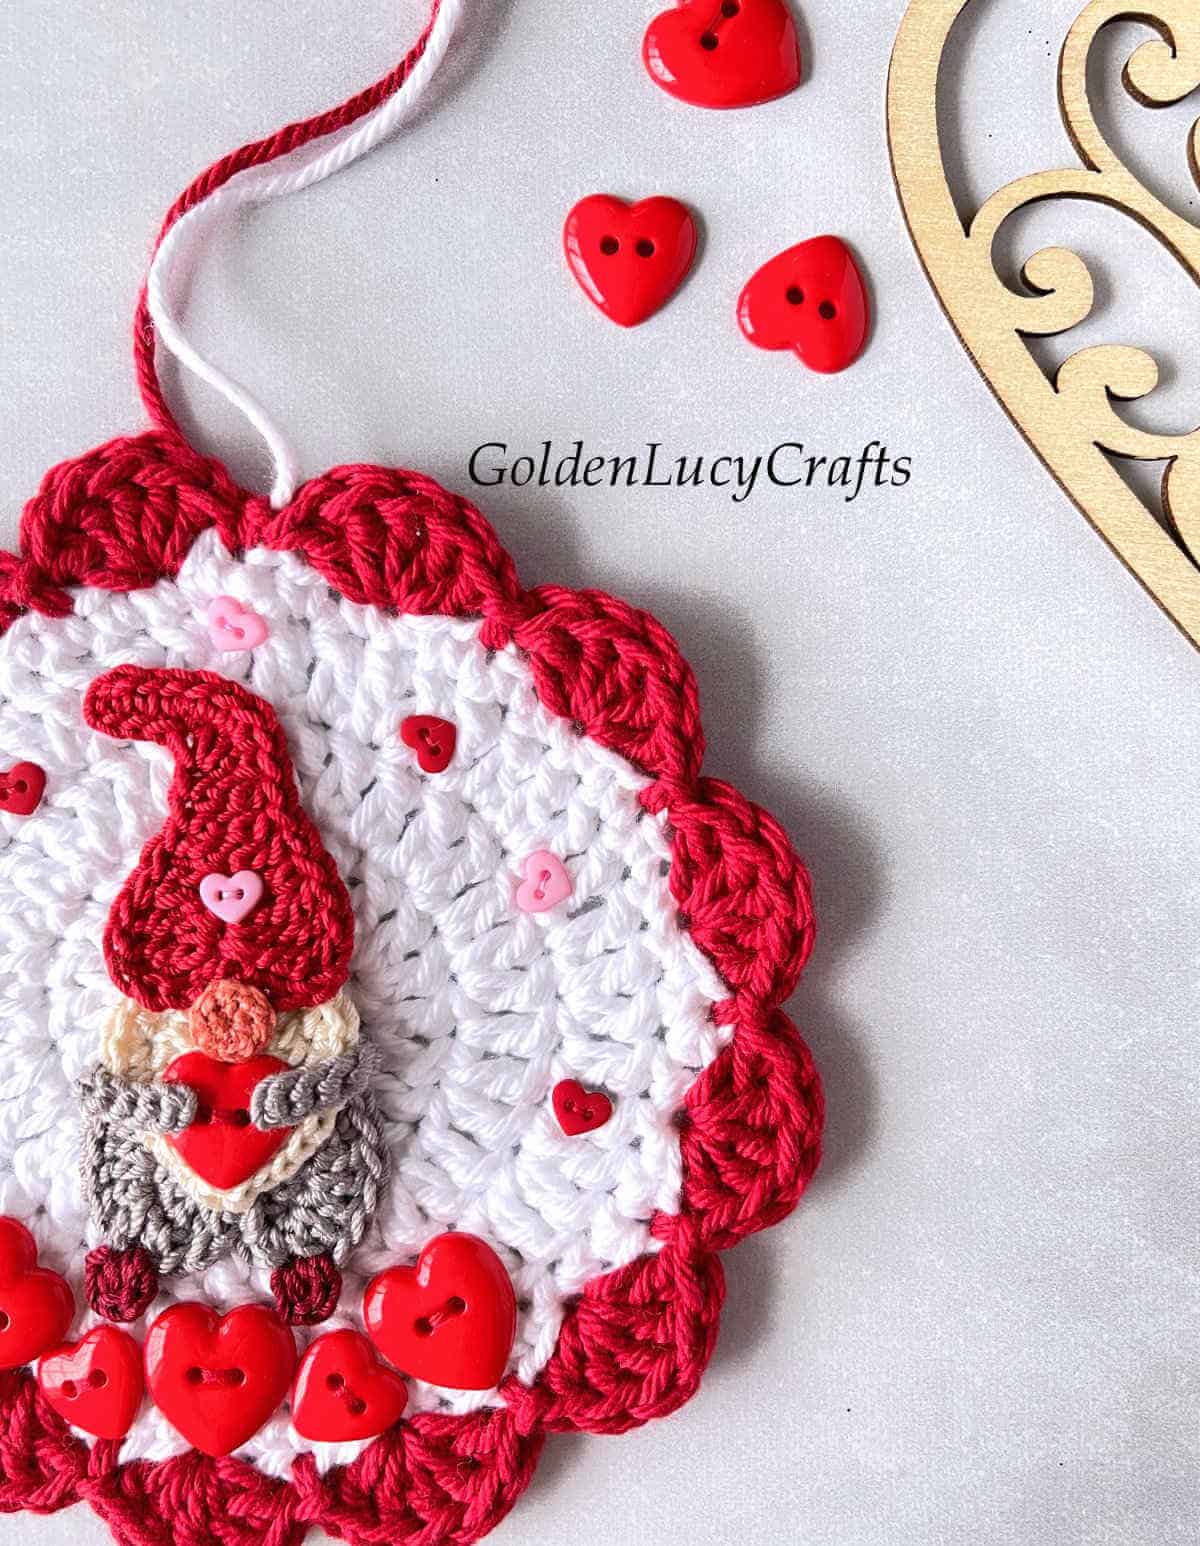 Close up picture of crocheted ornament for Valentine's Day.